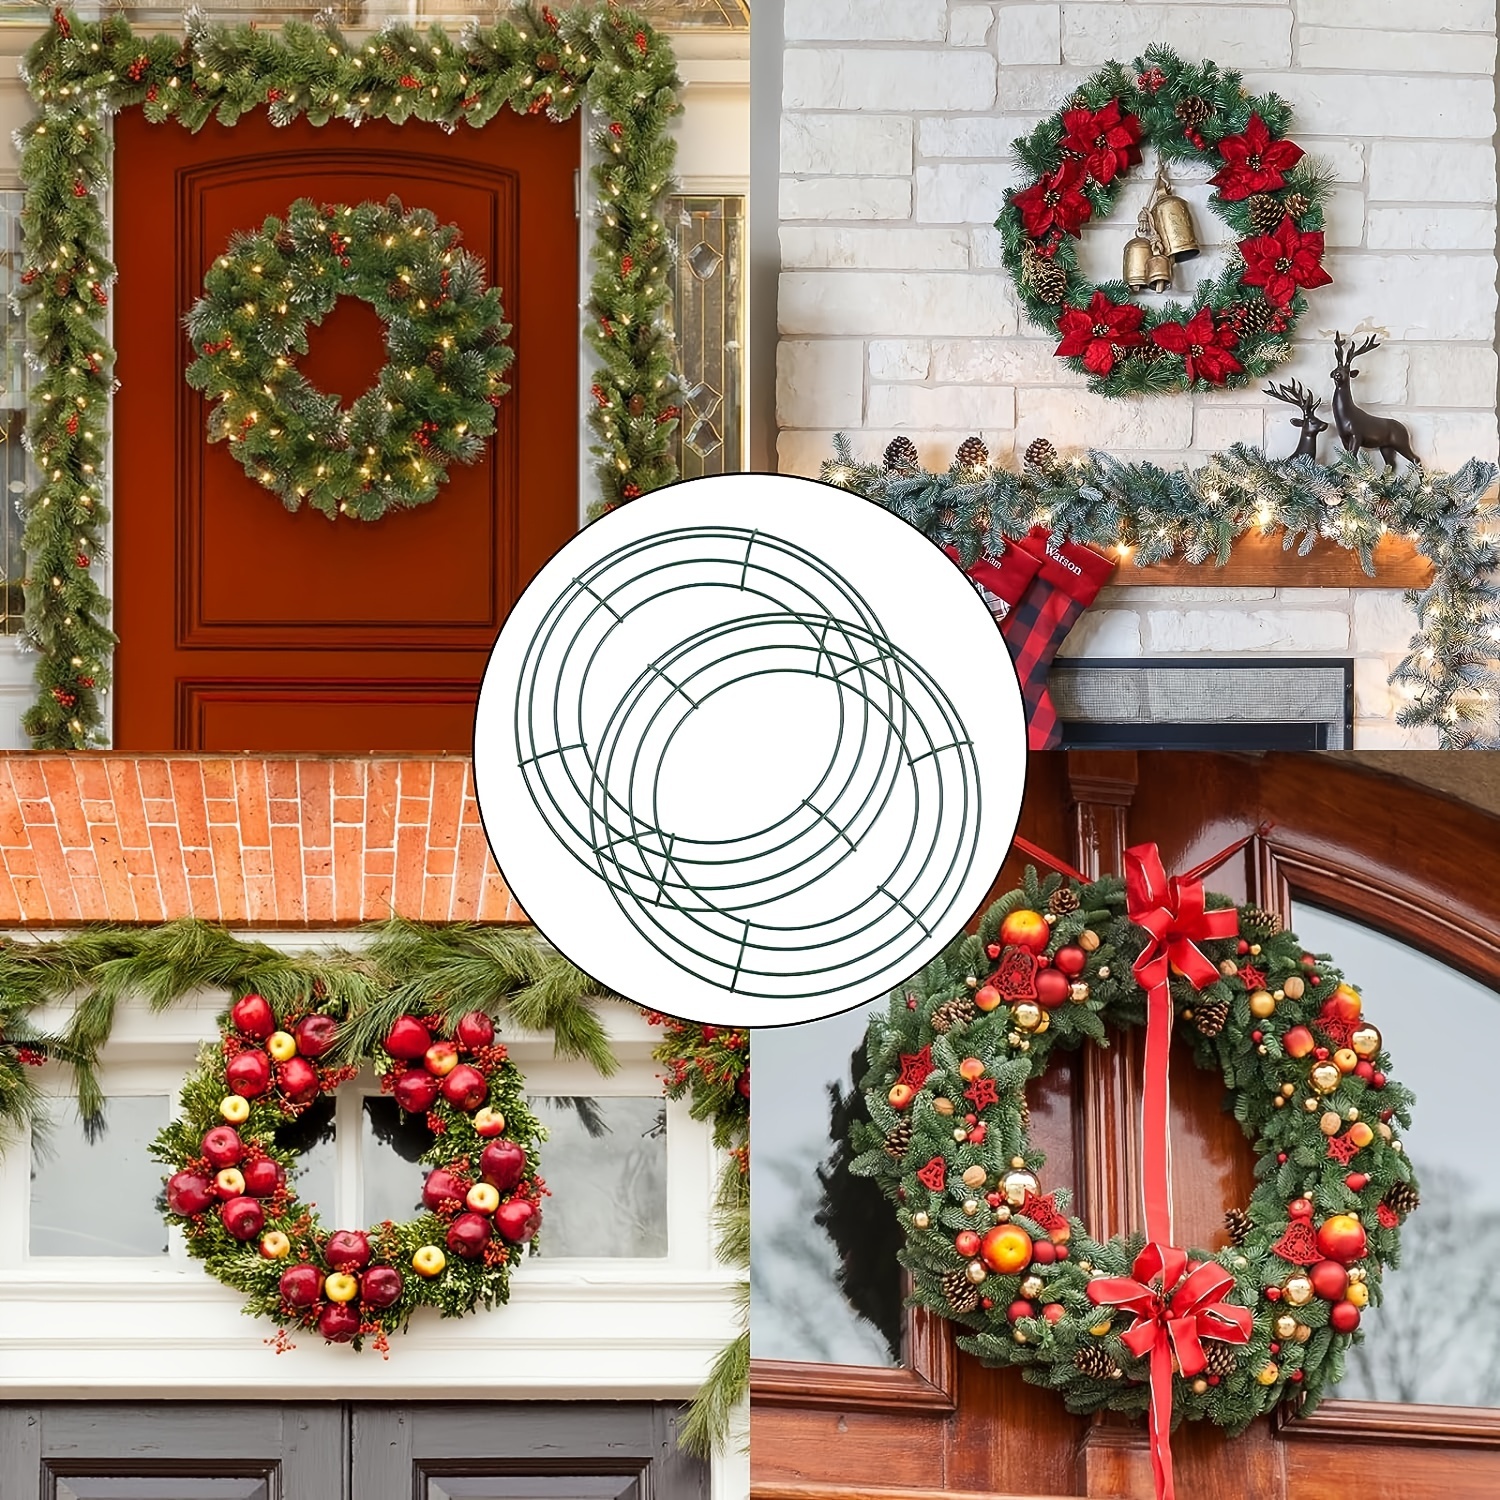  16 Pieces Wire Wreath Frame Wire Wreath Making Rings Green for  New Year Valentines Decoration (14 Inch) : Home & Kitchen